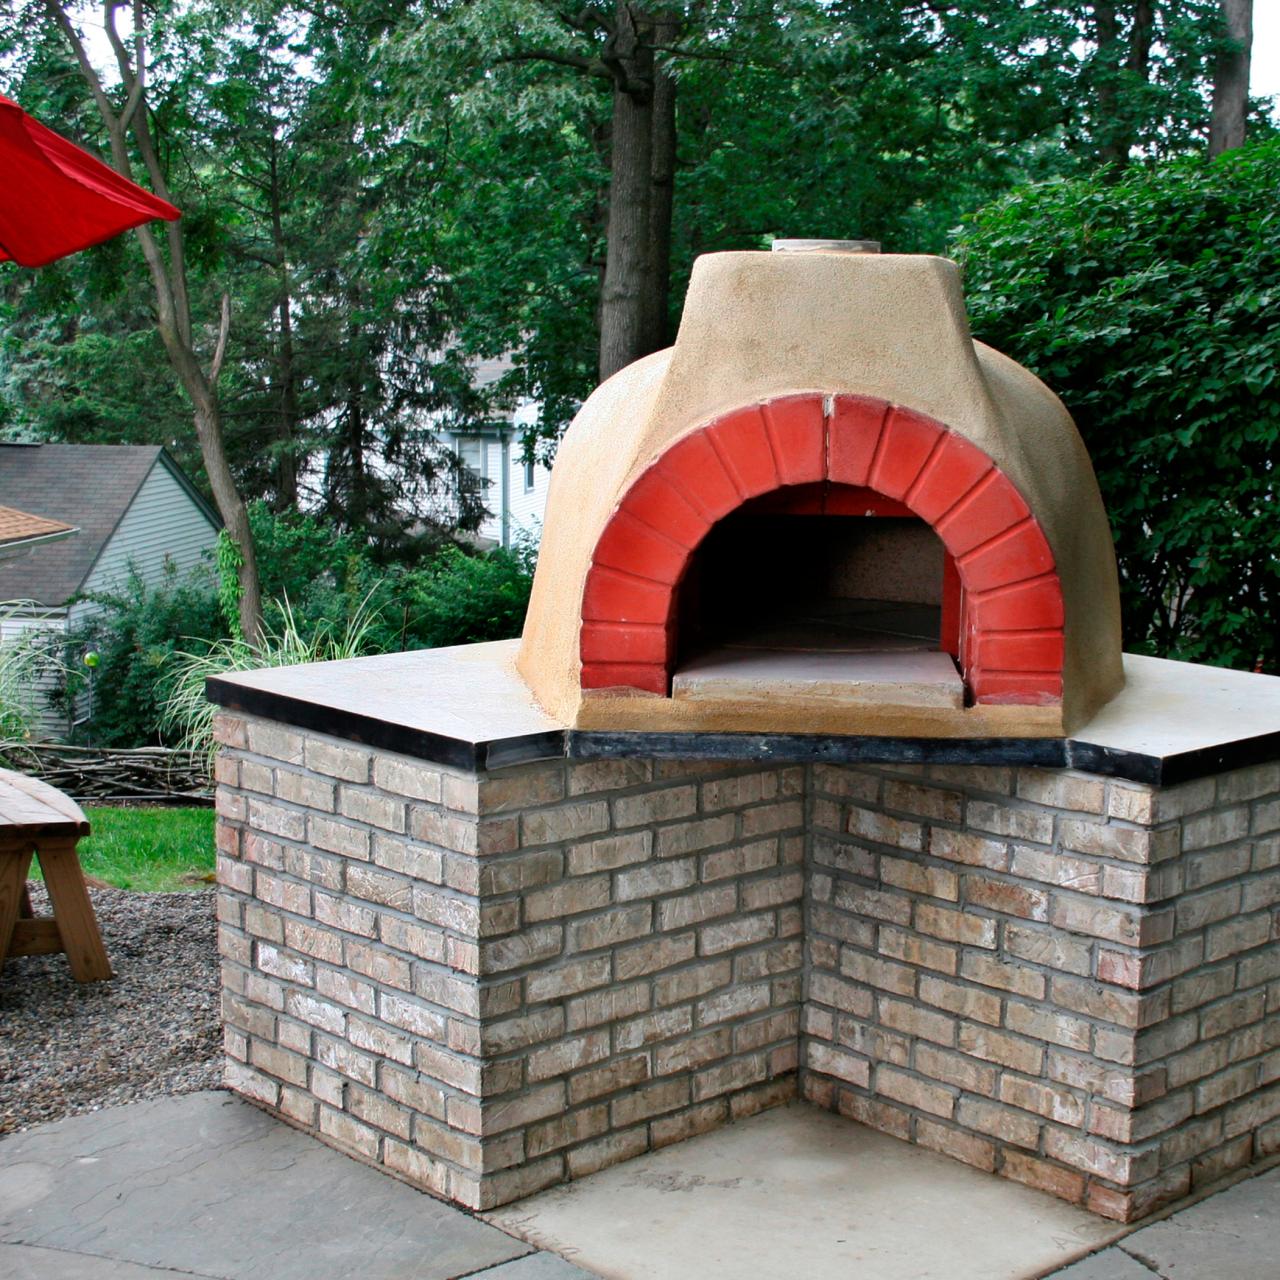 Wood Fired Brick Pizza Oven and Brick BBQ Grill  Brick pizza oven, Brick  bbq, Brick pizza oven outdoor